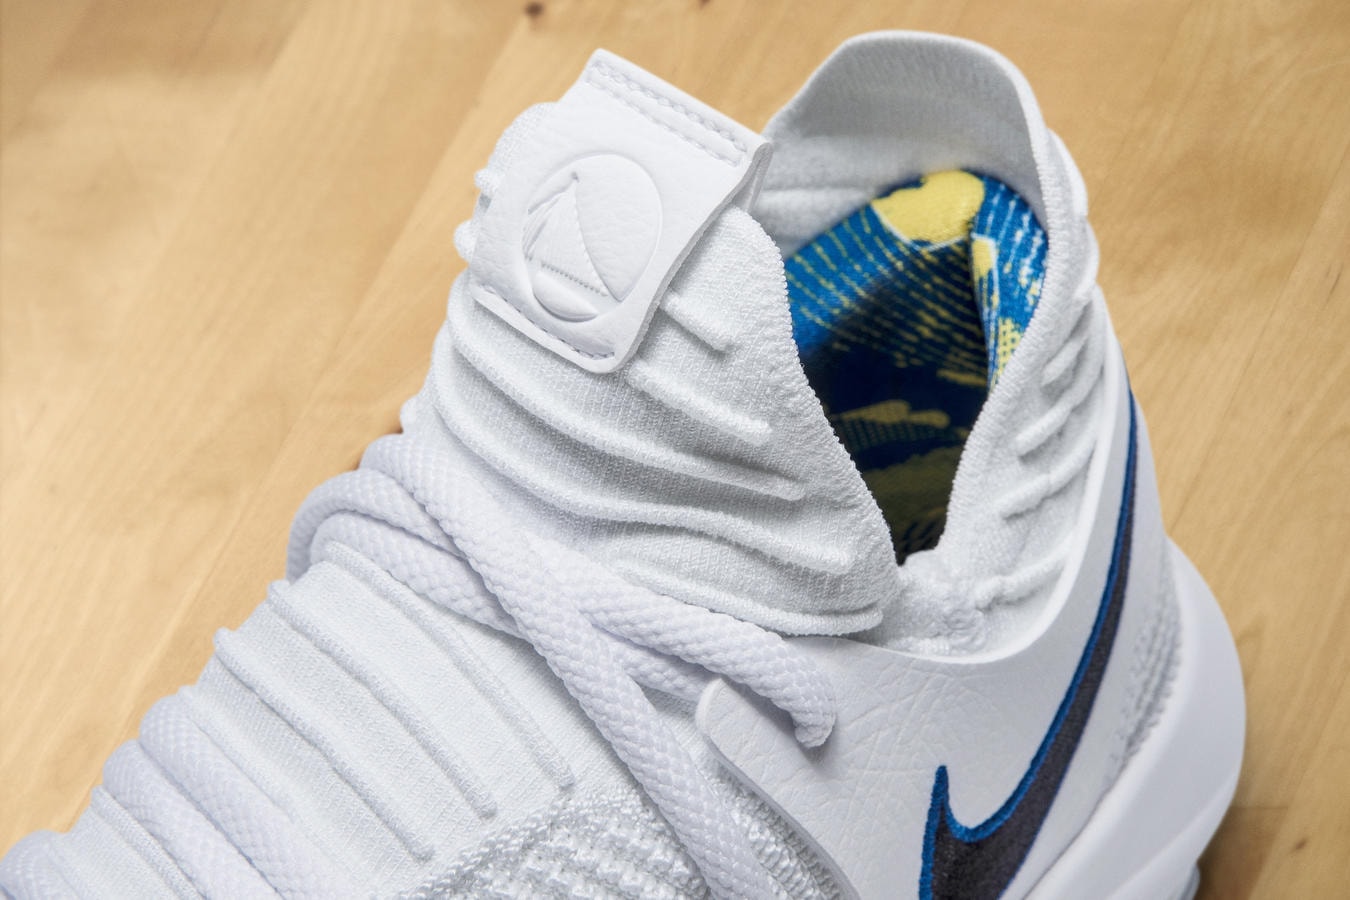 Nike KD 10 Numbers Kevin Durant NBA Golden State Warriors Sneakers Release Date Info October 1